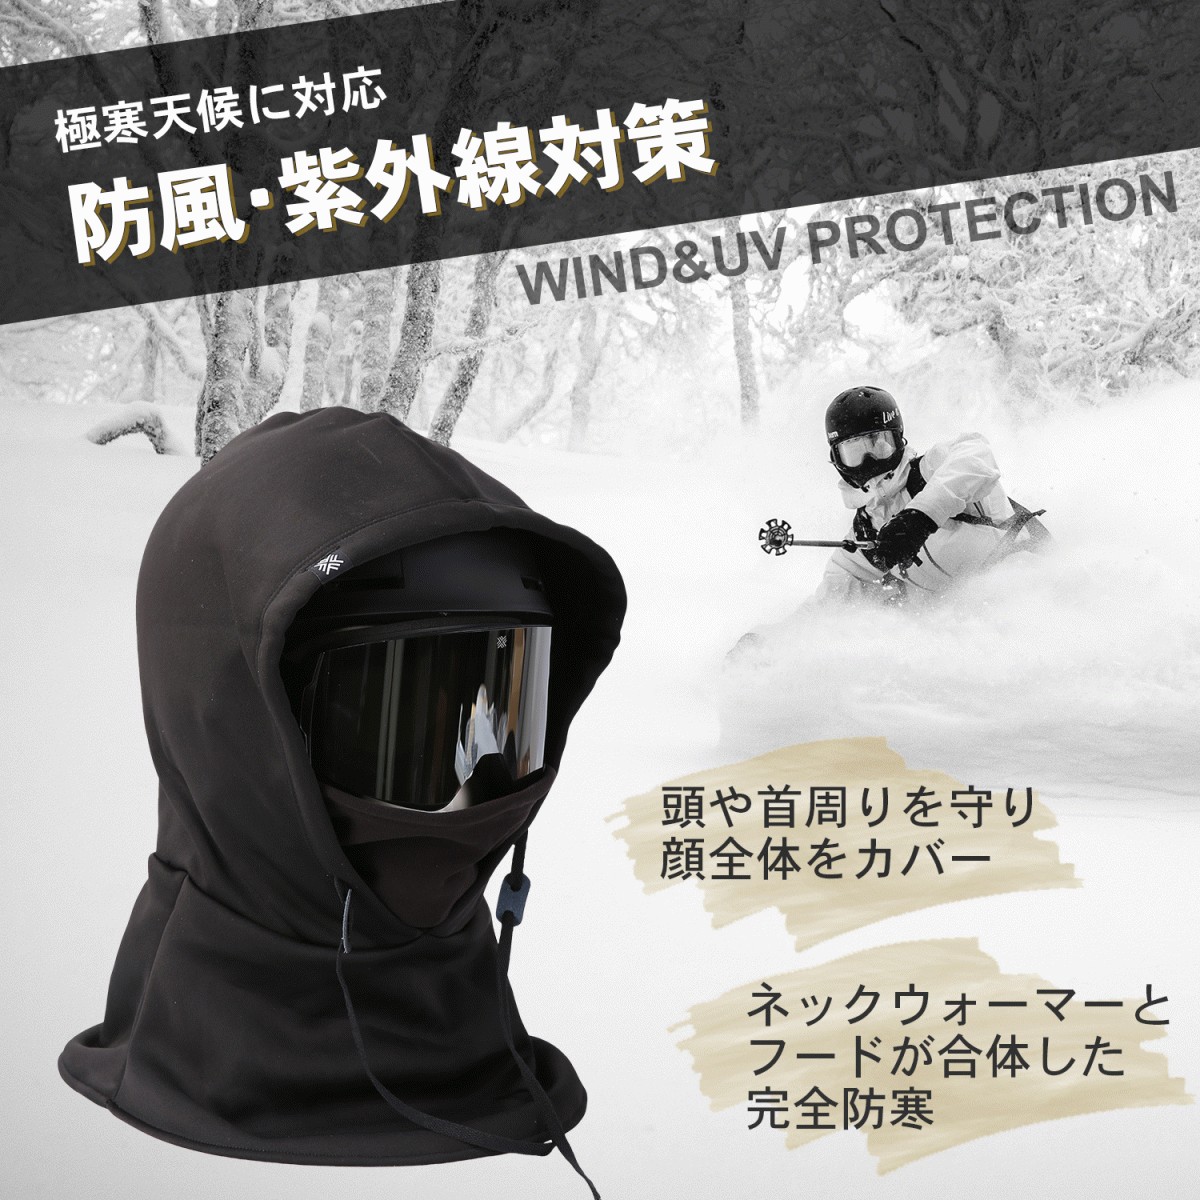 [ coupon equipped ] hood warmer neck warmer ski snowboard face mask balaclava water-repellent protection against cold . manner helmet correspondence man and woman use firn Phil n